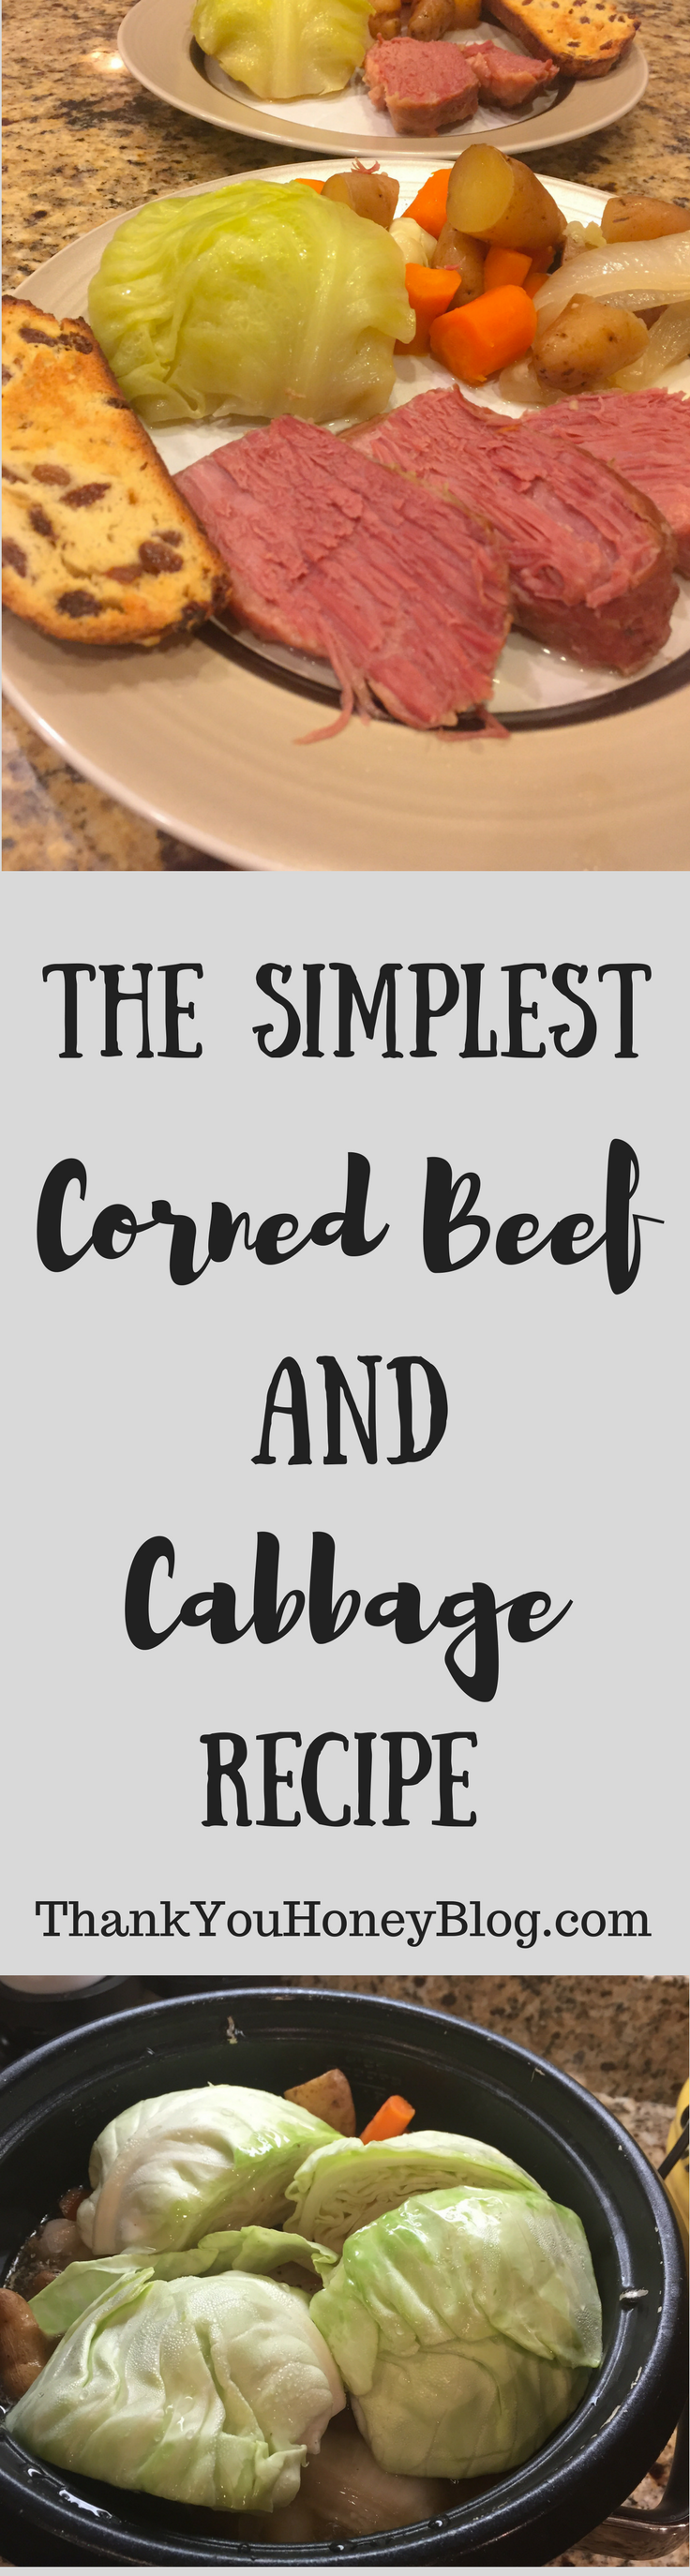 The Simplest Corned Beef and Cabbage Recipe